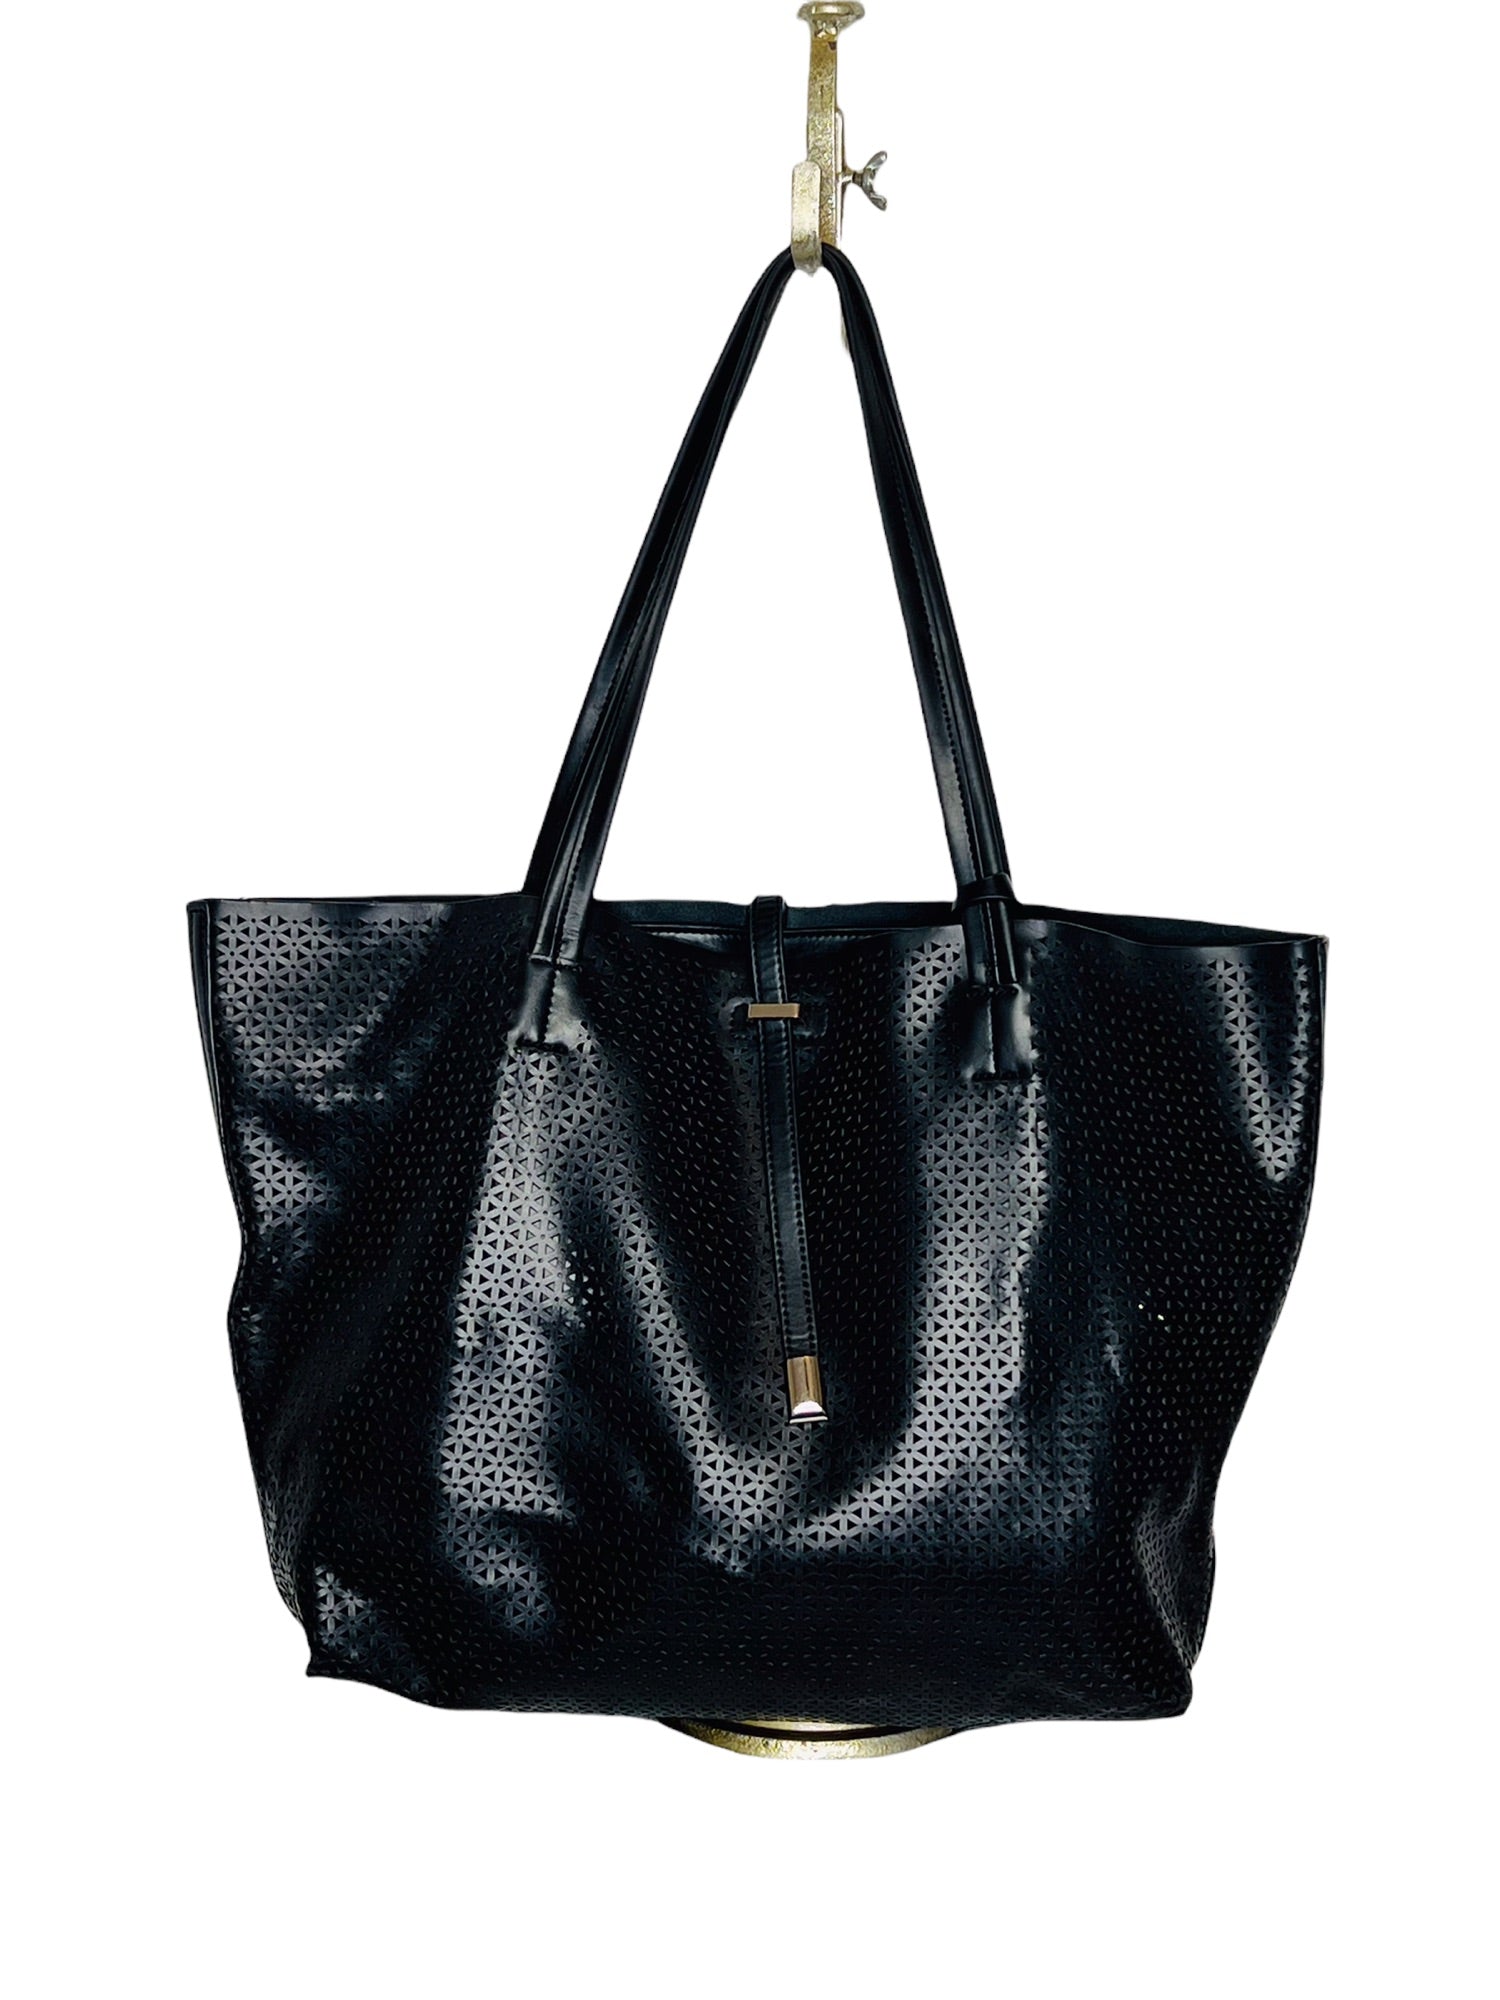 Vince Camuto, Bags, Vince Camuto Leila Tote